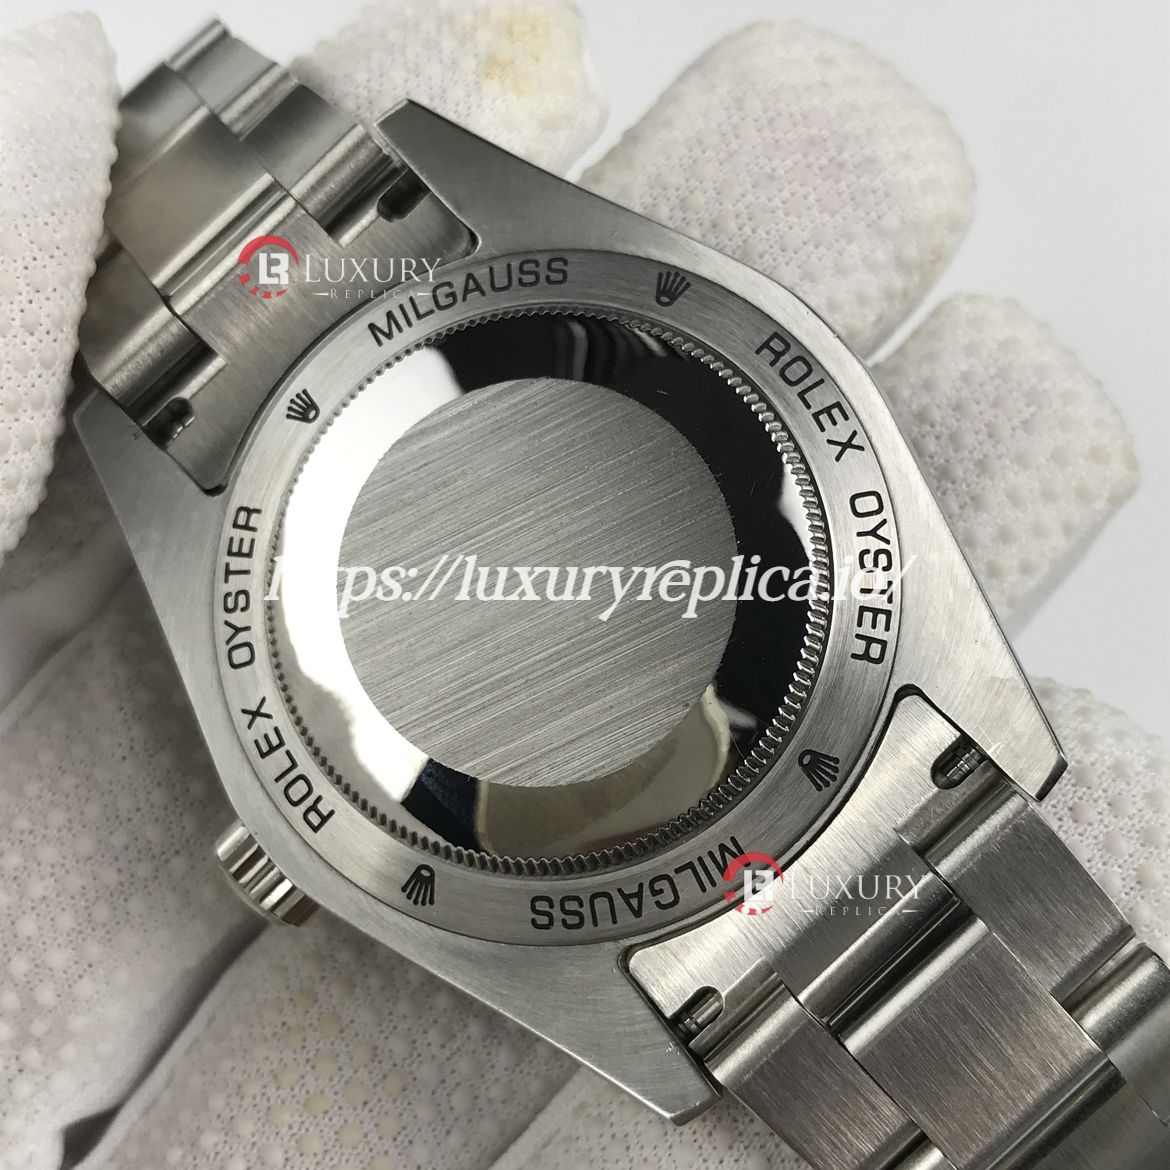 ROLEX MILGAUSS 116400 WHITE DIAL OYSTER BAND